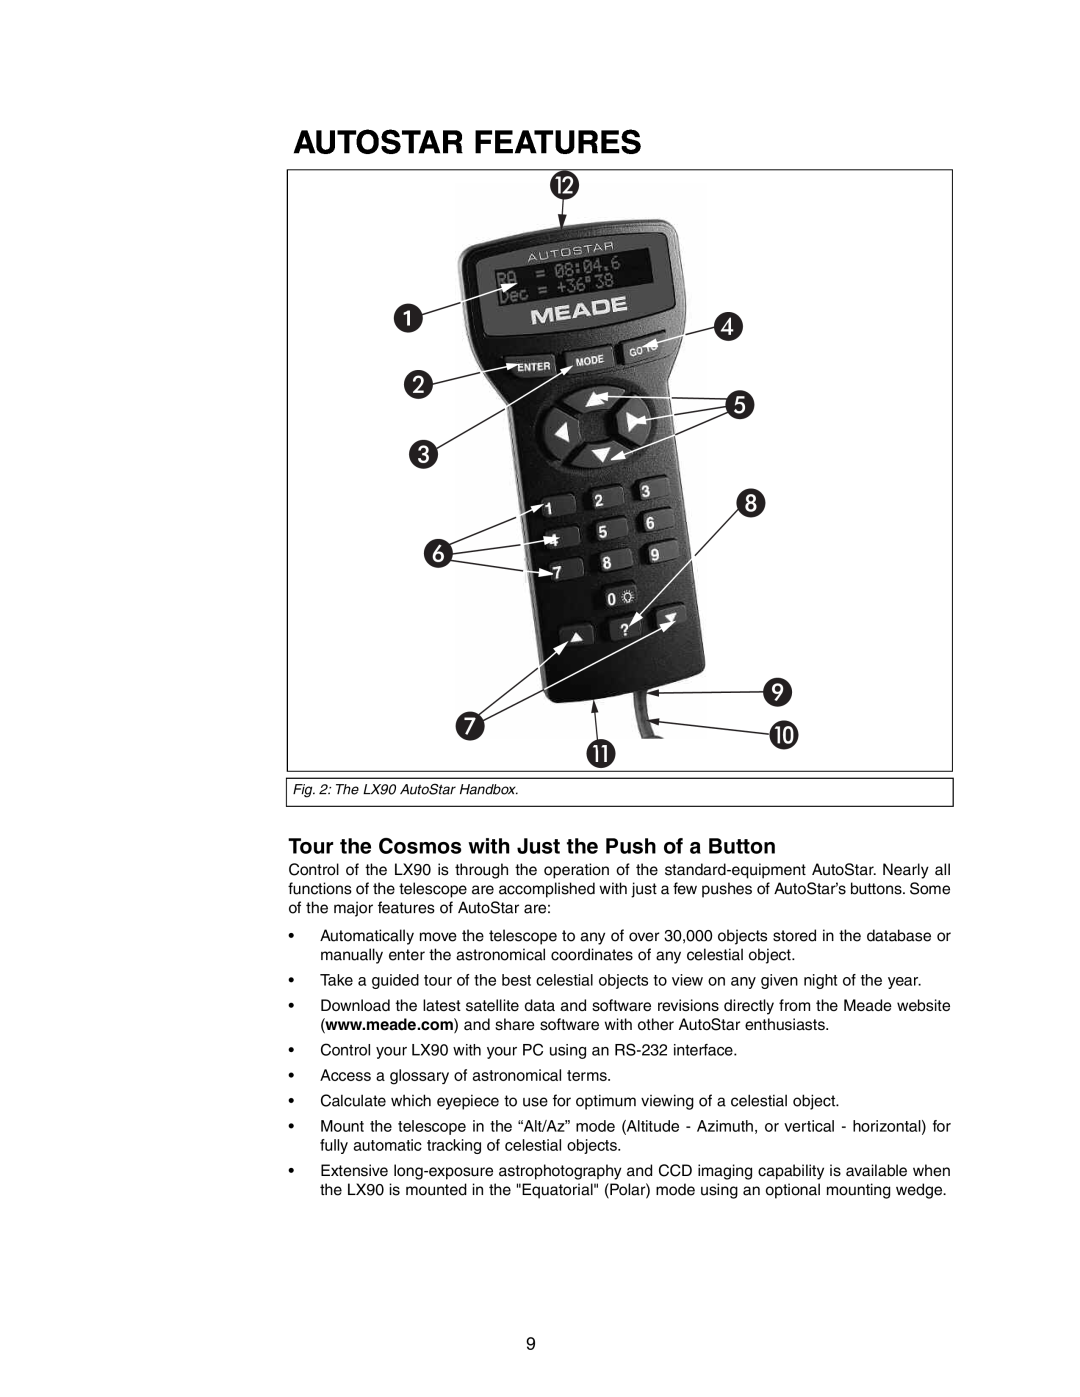 Meade LX90GPS instruction manual Autostar Features, Tour the Cosmos with Just the Push of a Button, I Gk J 